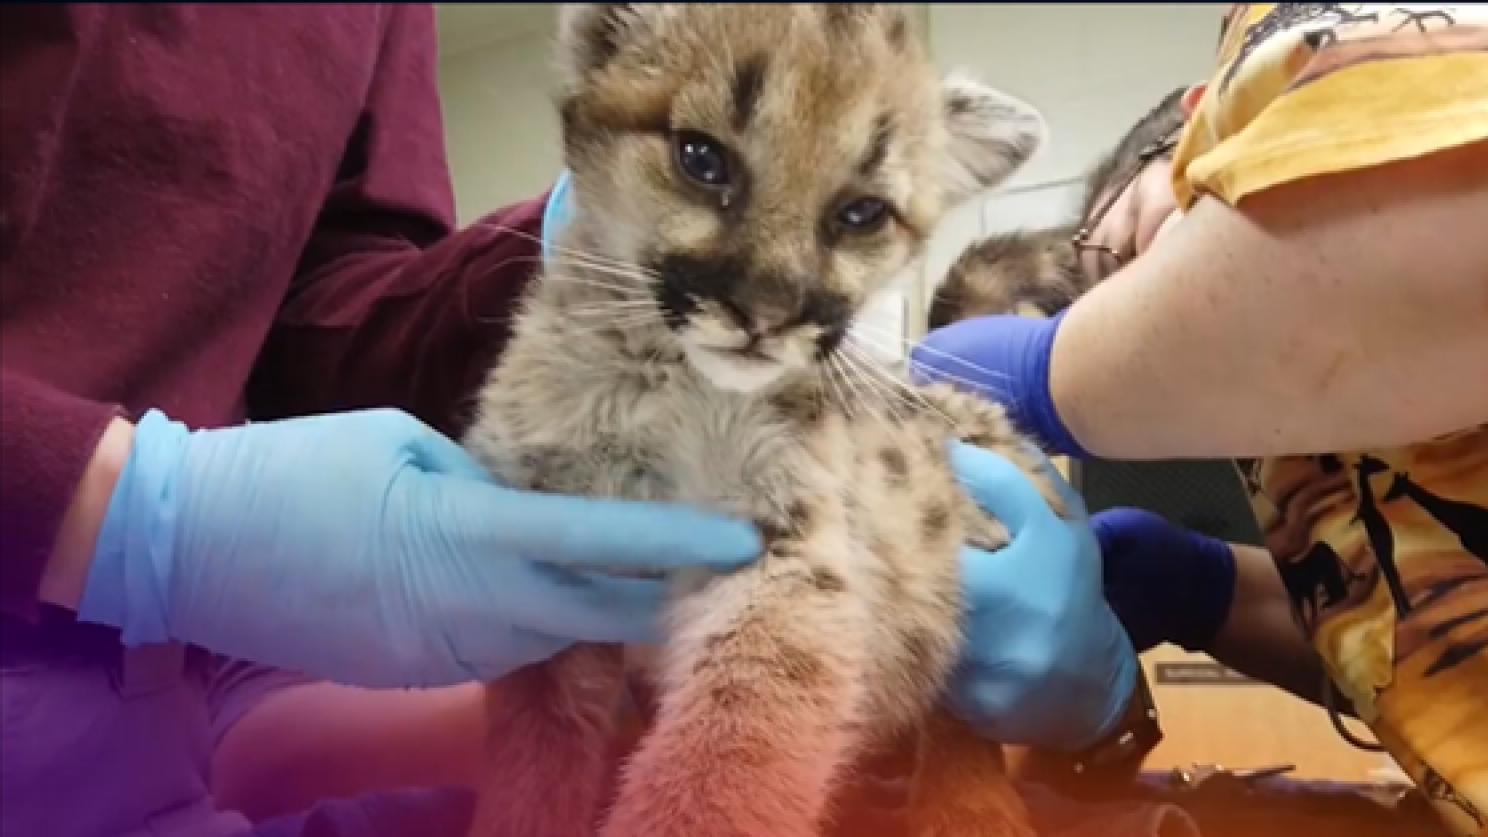 klauw morfine diepvries Four puma kittens delivered safely to Memphis Zoo, courtesy of FedEx |  FedEx Cares